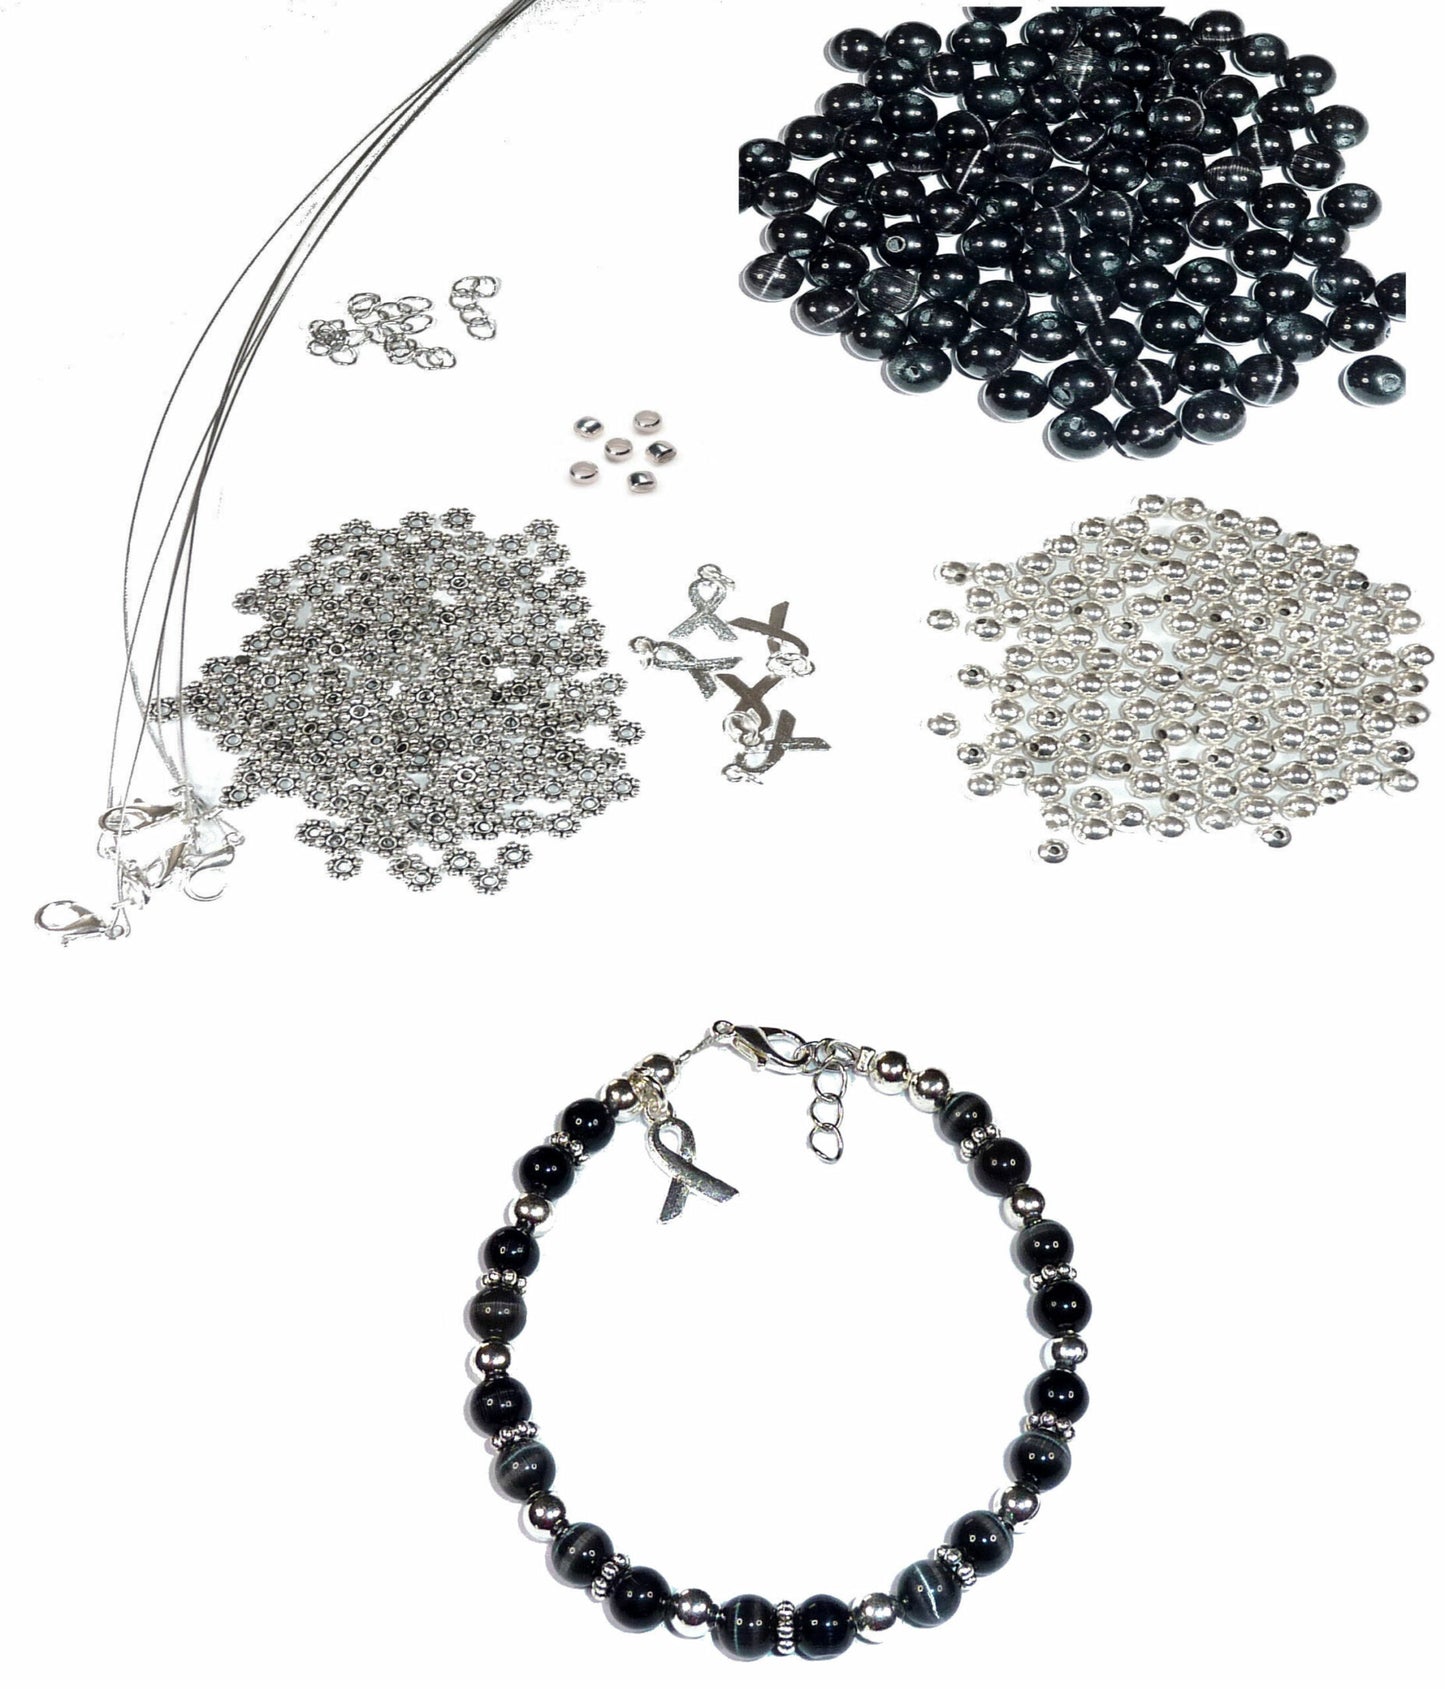 DIY Kit, Everything You Need to Make Cancer Awareness Bracelets, Uses Wire, Crimps and Clasps, Makes 5 - Black (Melanoma)